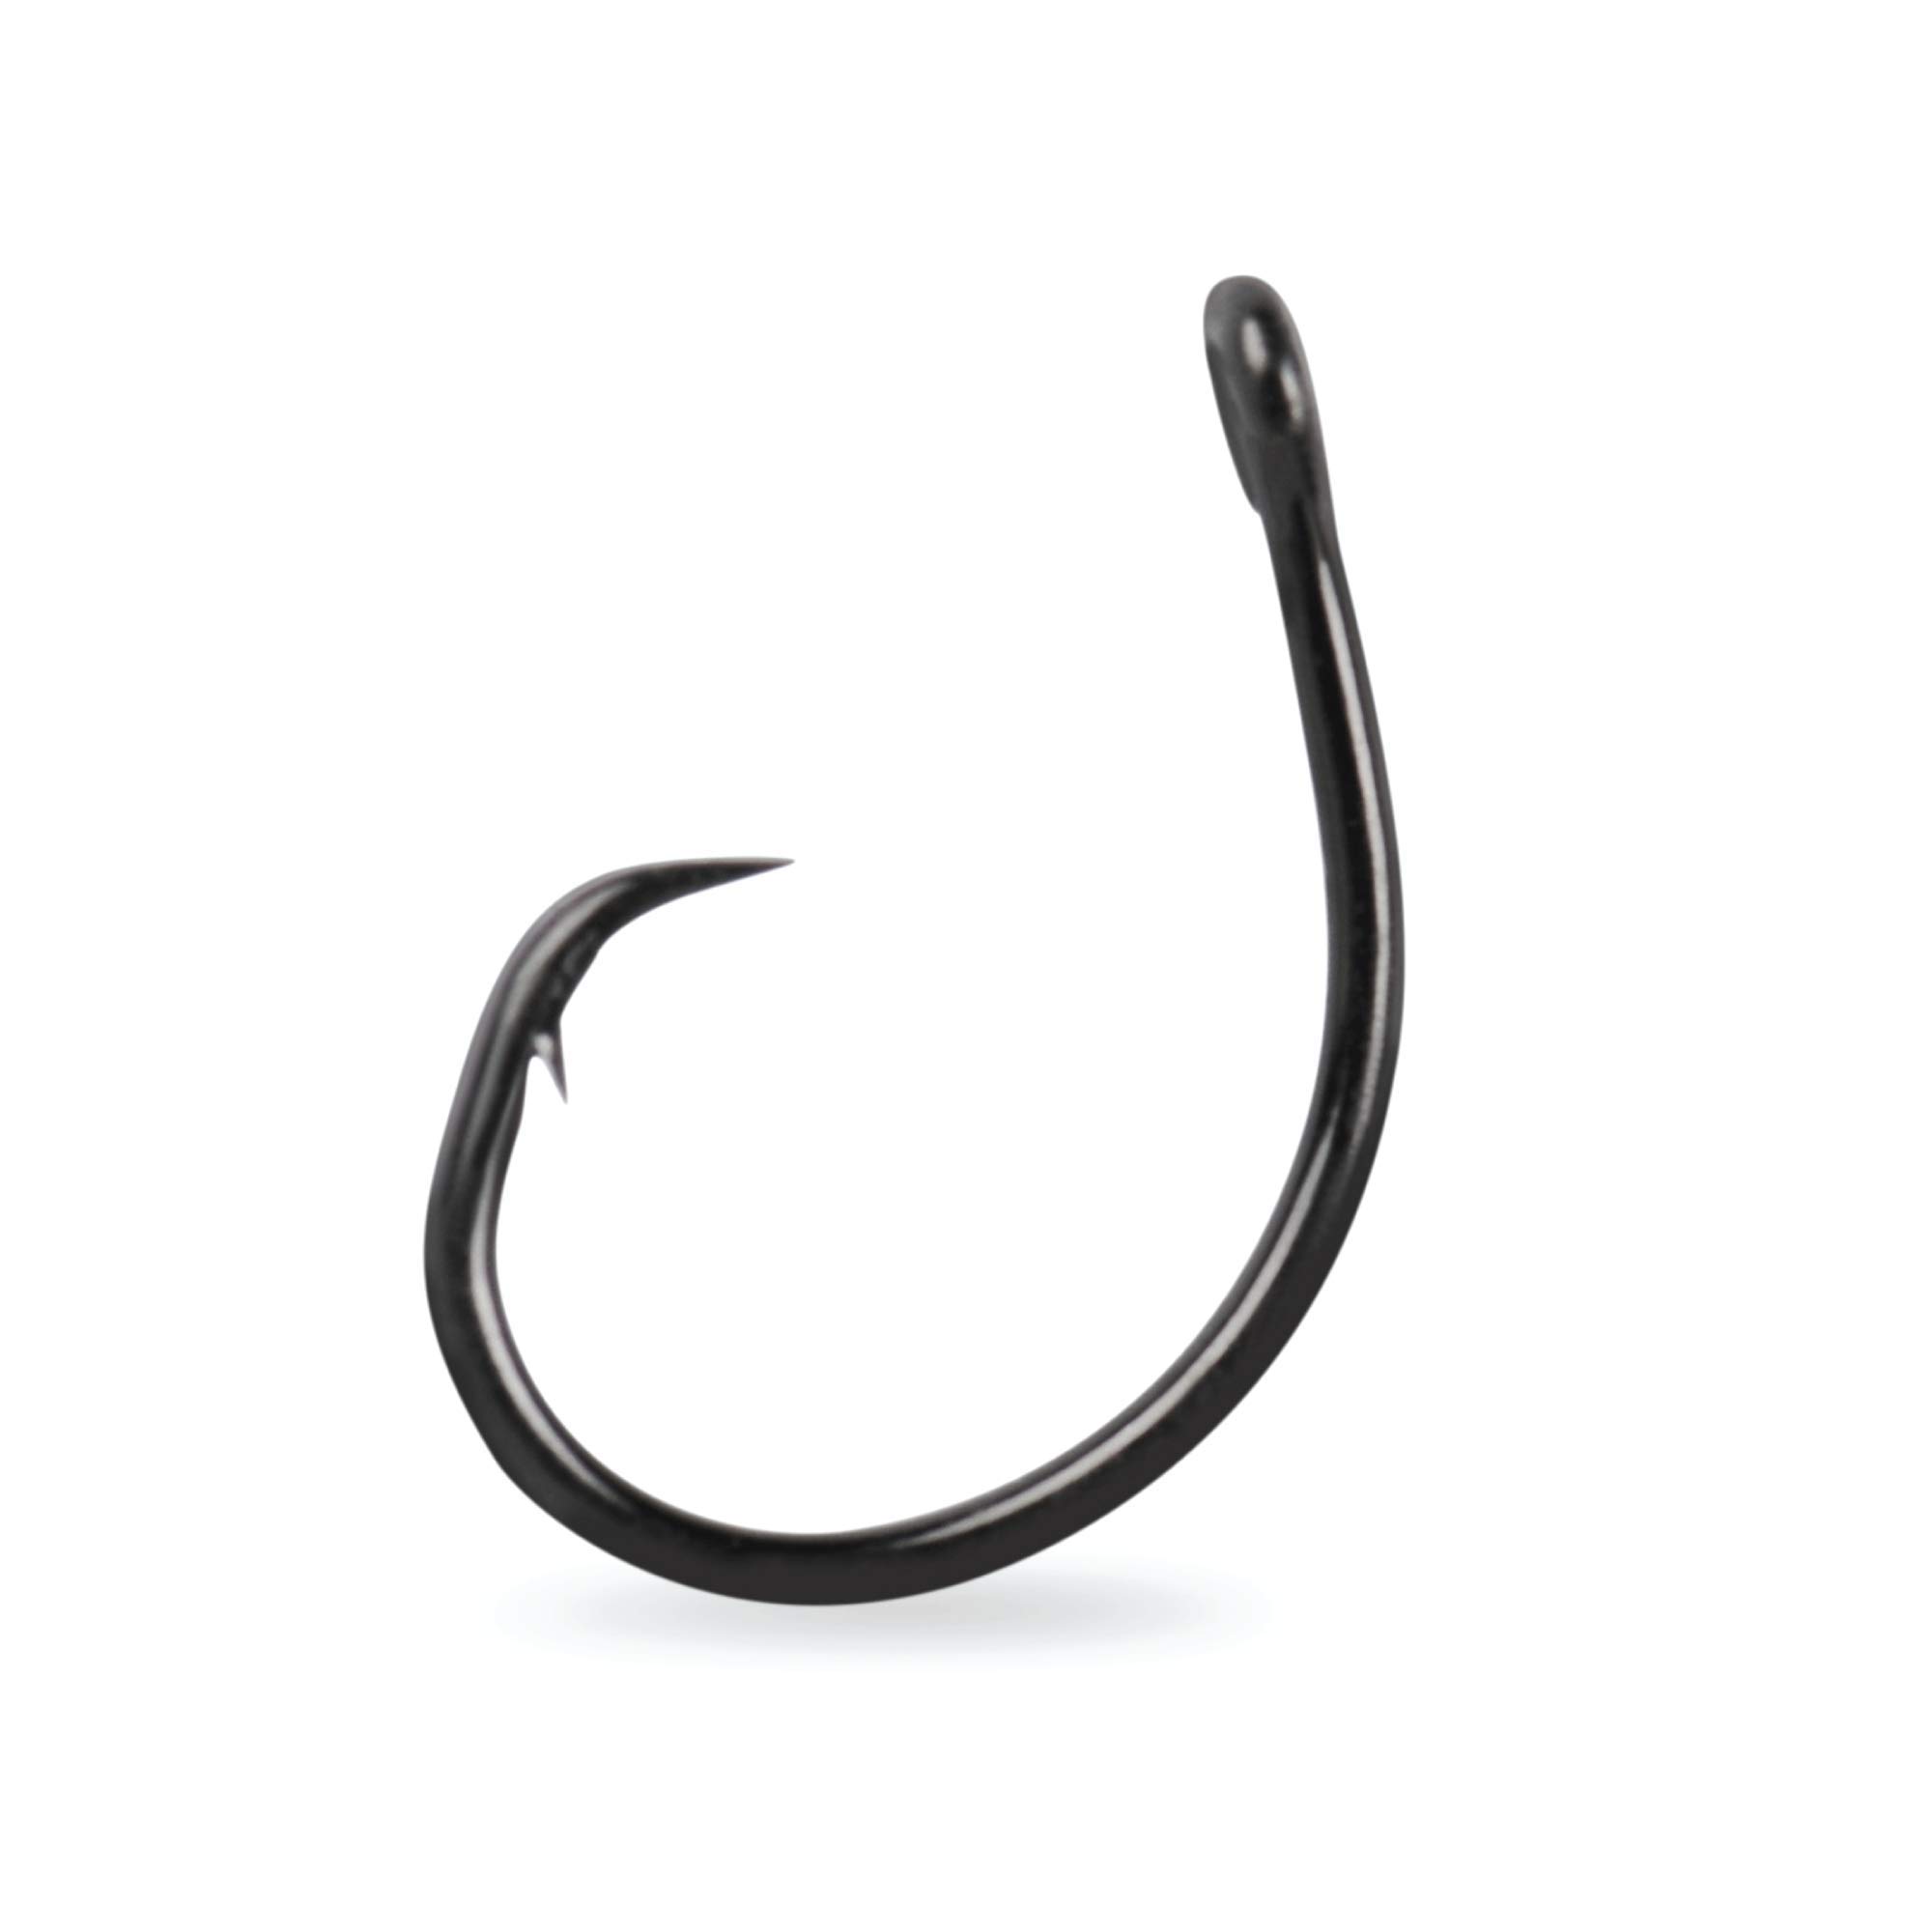 Fish hook Black Cat Triple 2/0 - Nootica - Water addicts, like you!